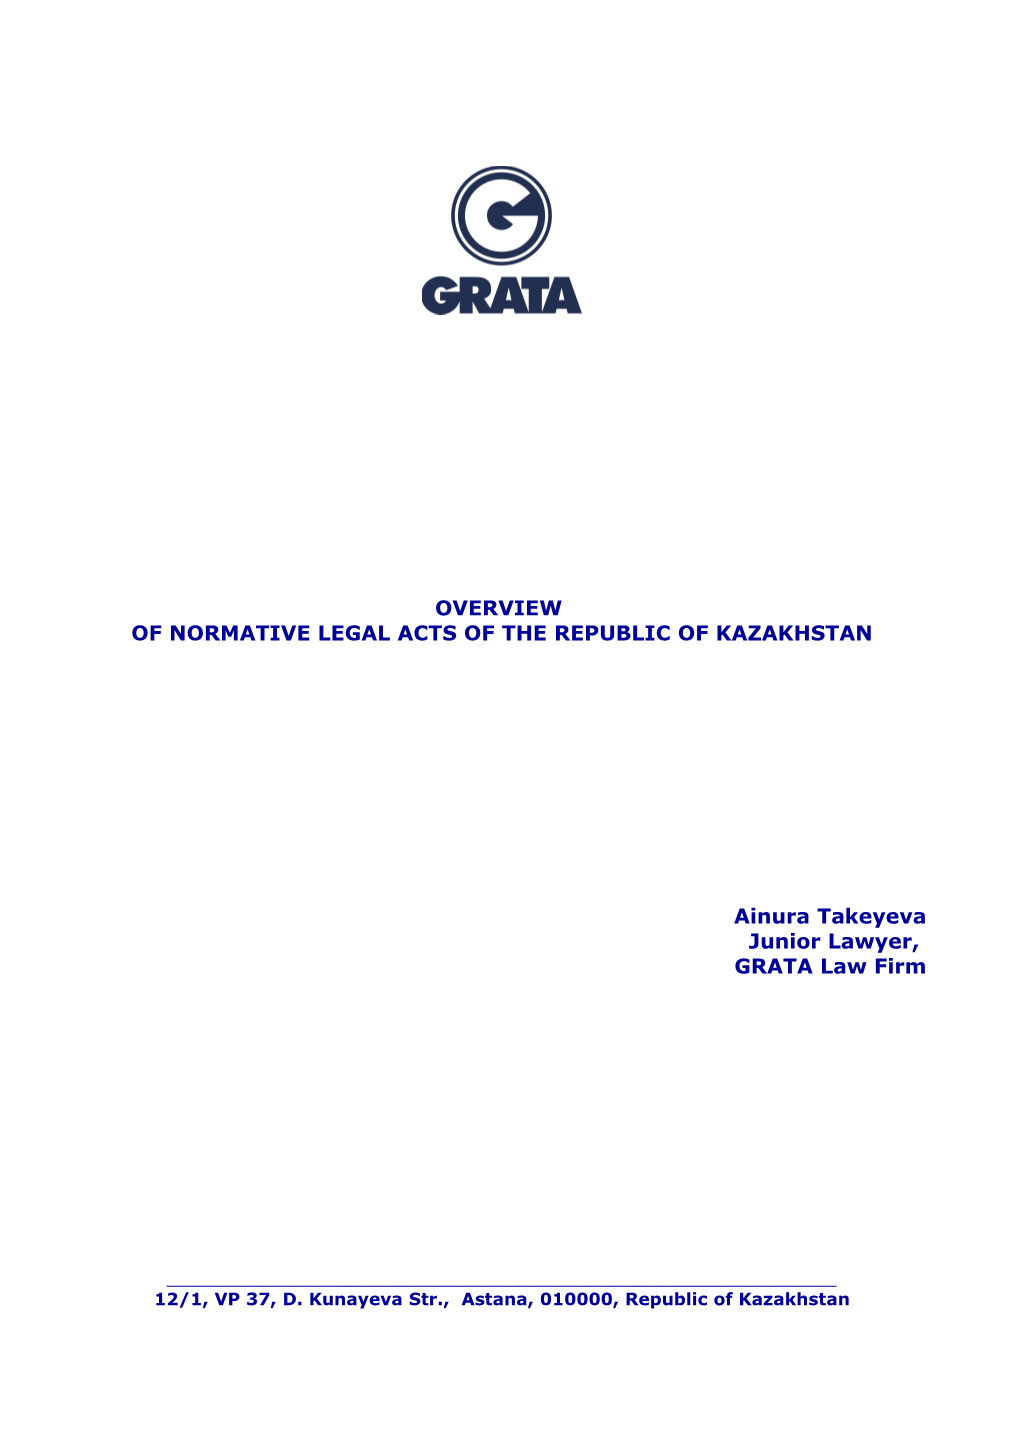 Of Normative Legal Acts of the Republic of Kazakhstan